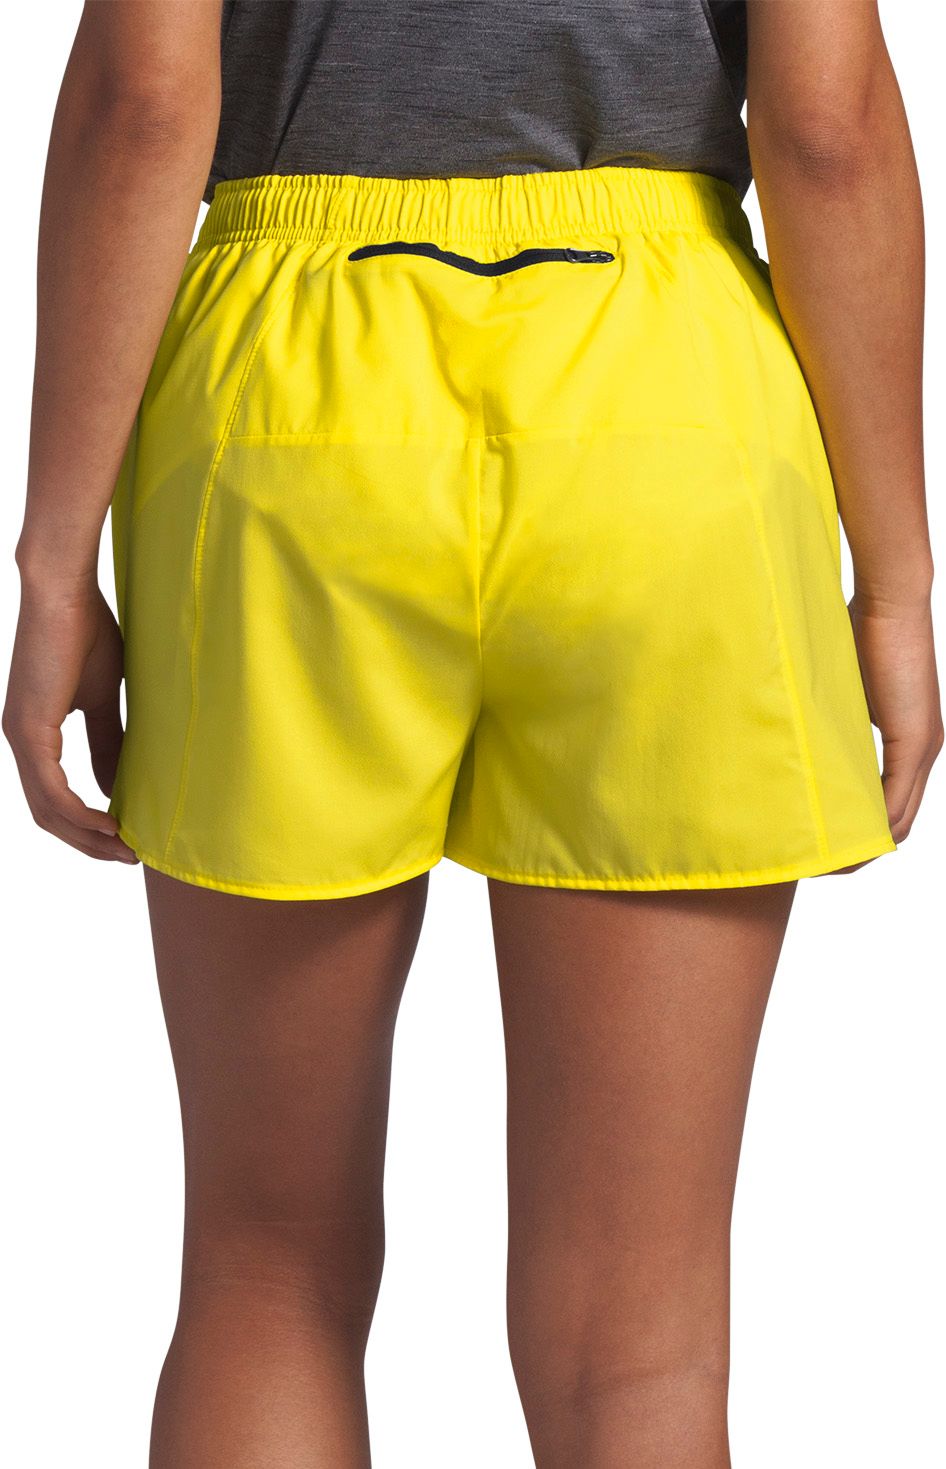 north face women's on the go shorts